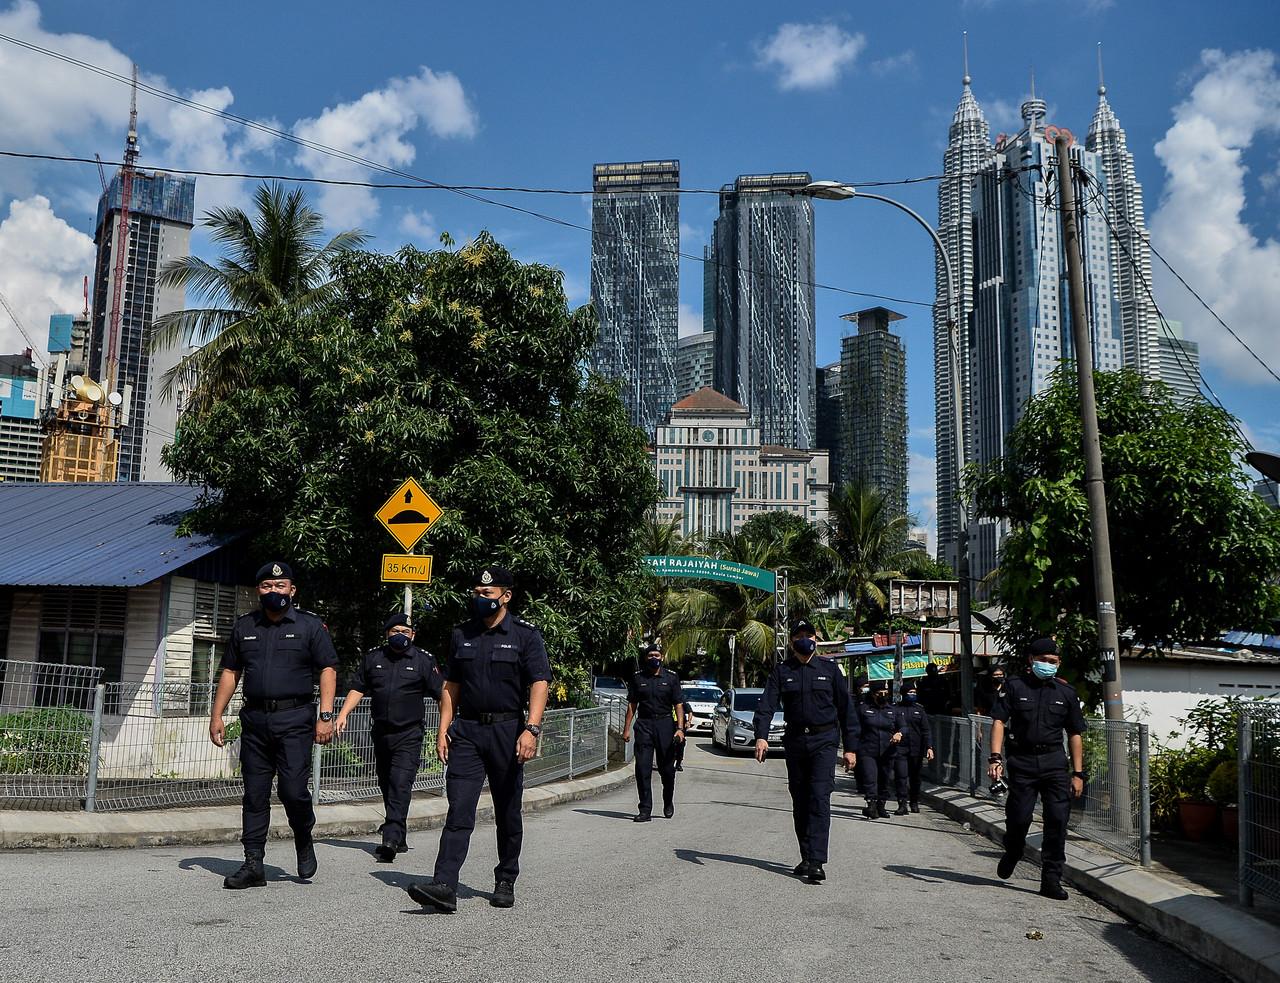 Police officers patrol an area in Kuala Lumpur during the movement control order earlier this month. The government says enforcement of SOPs at the workplace will be stepped up to ensure that members of the public comply with health measures to curb the spread of Covid-19. Photo: Bernama